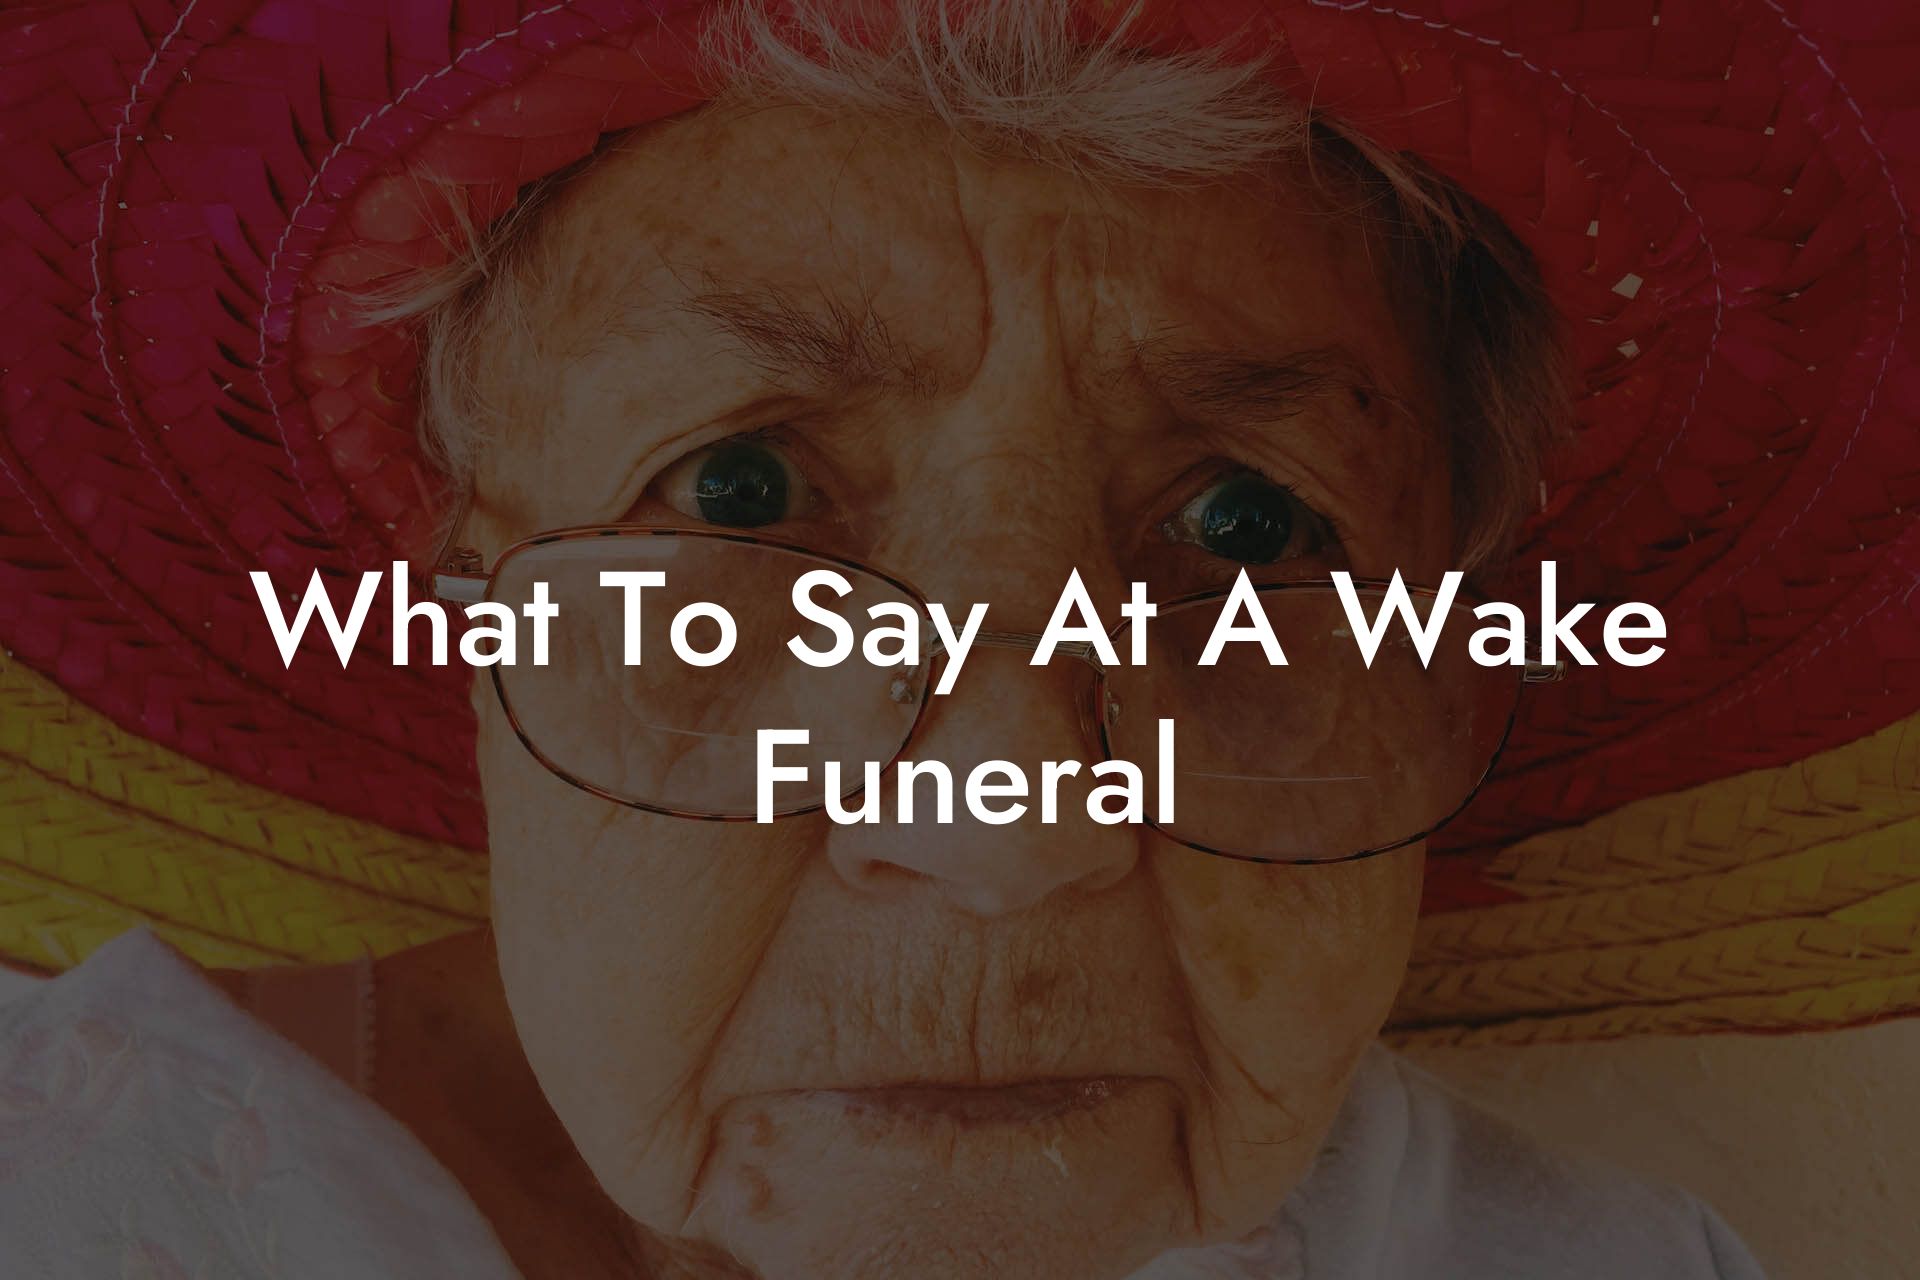 What To Say At A Wake Funeral